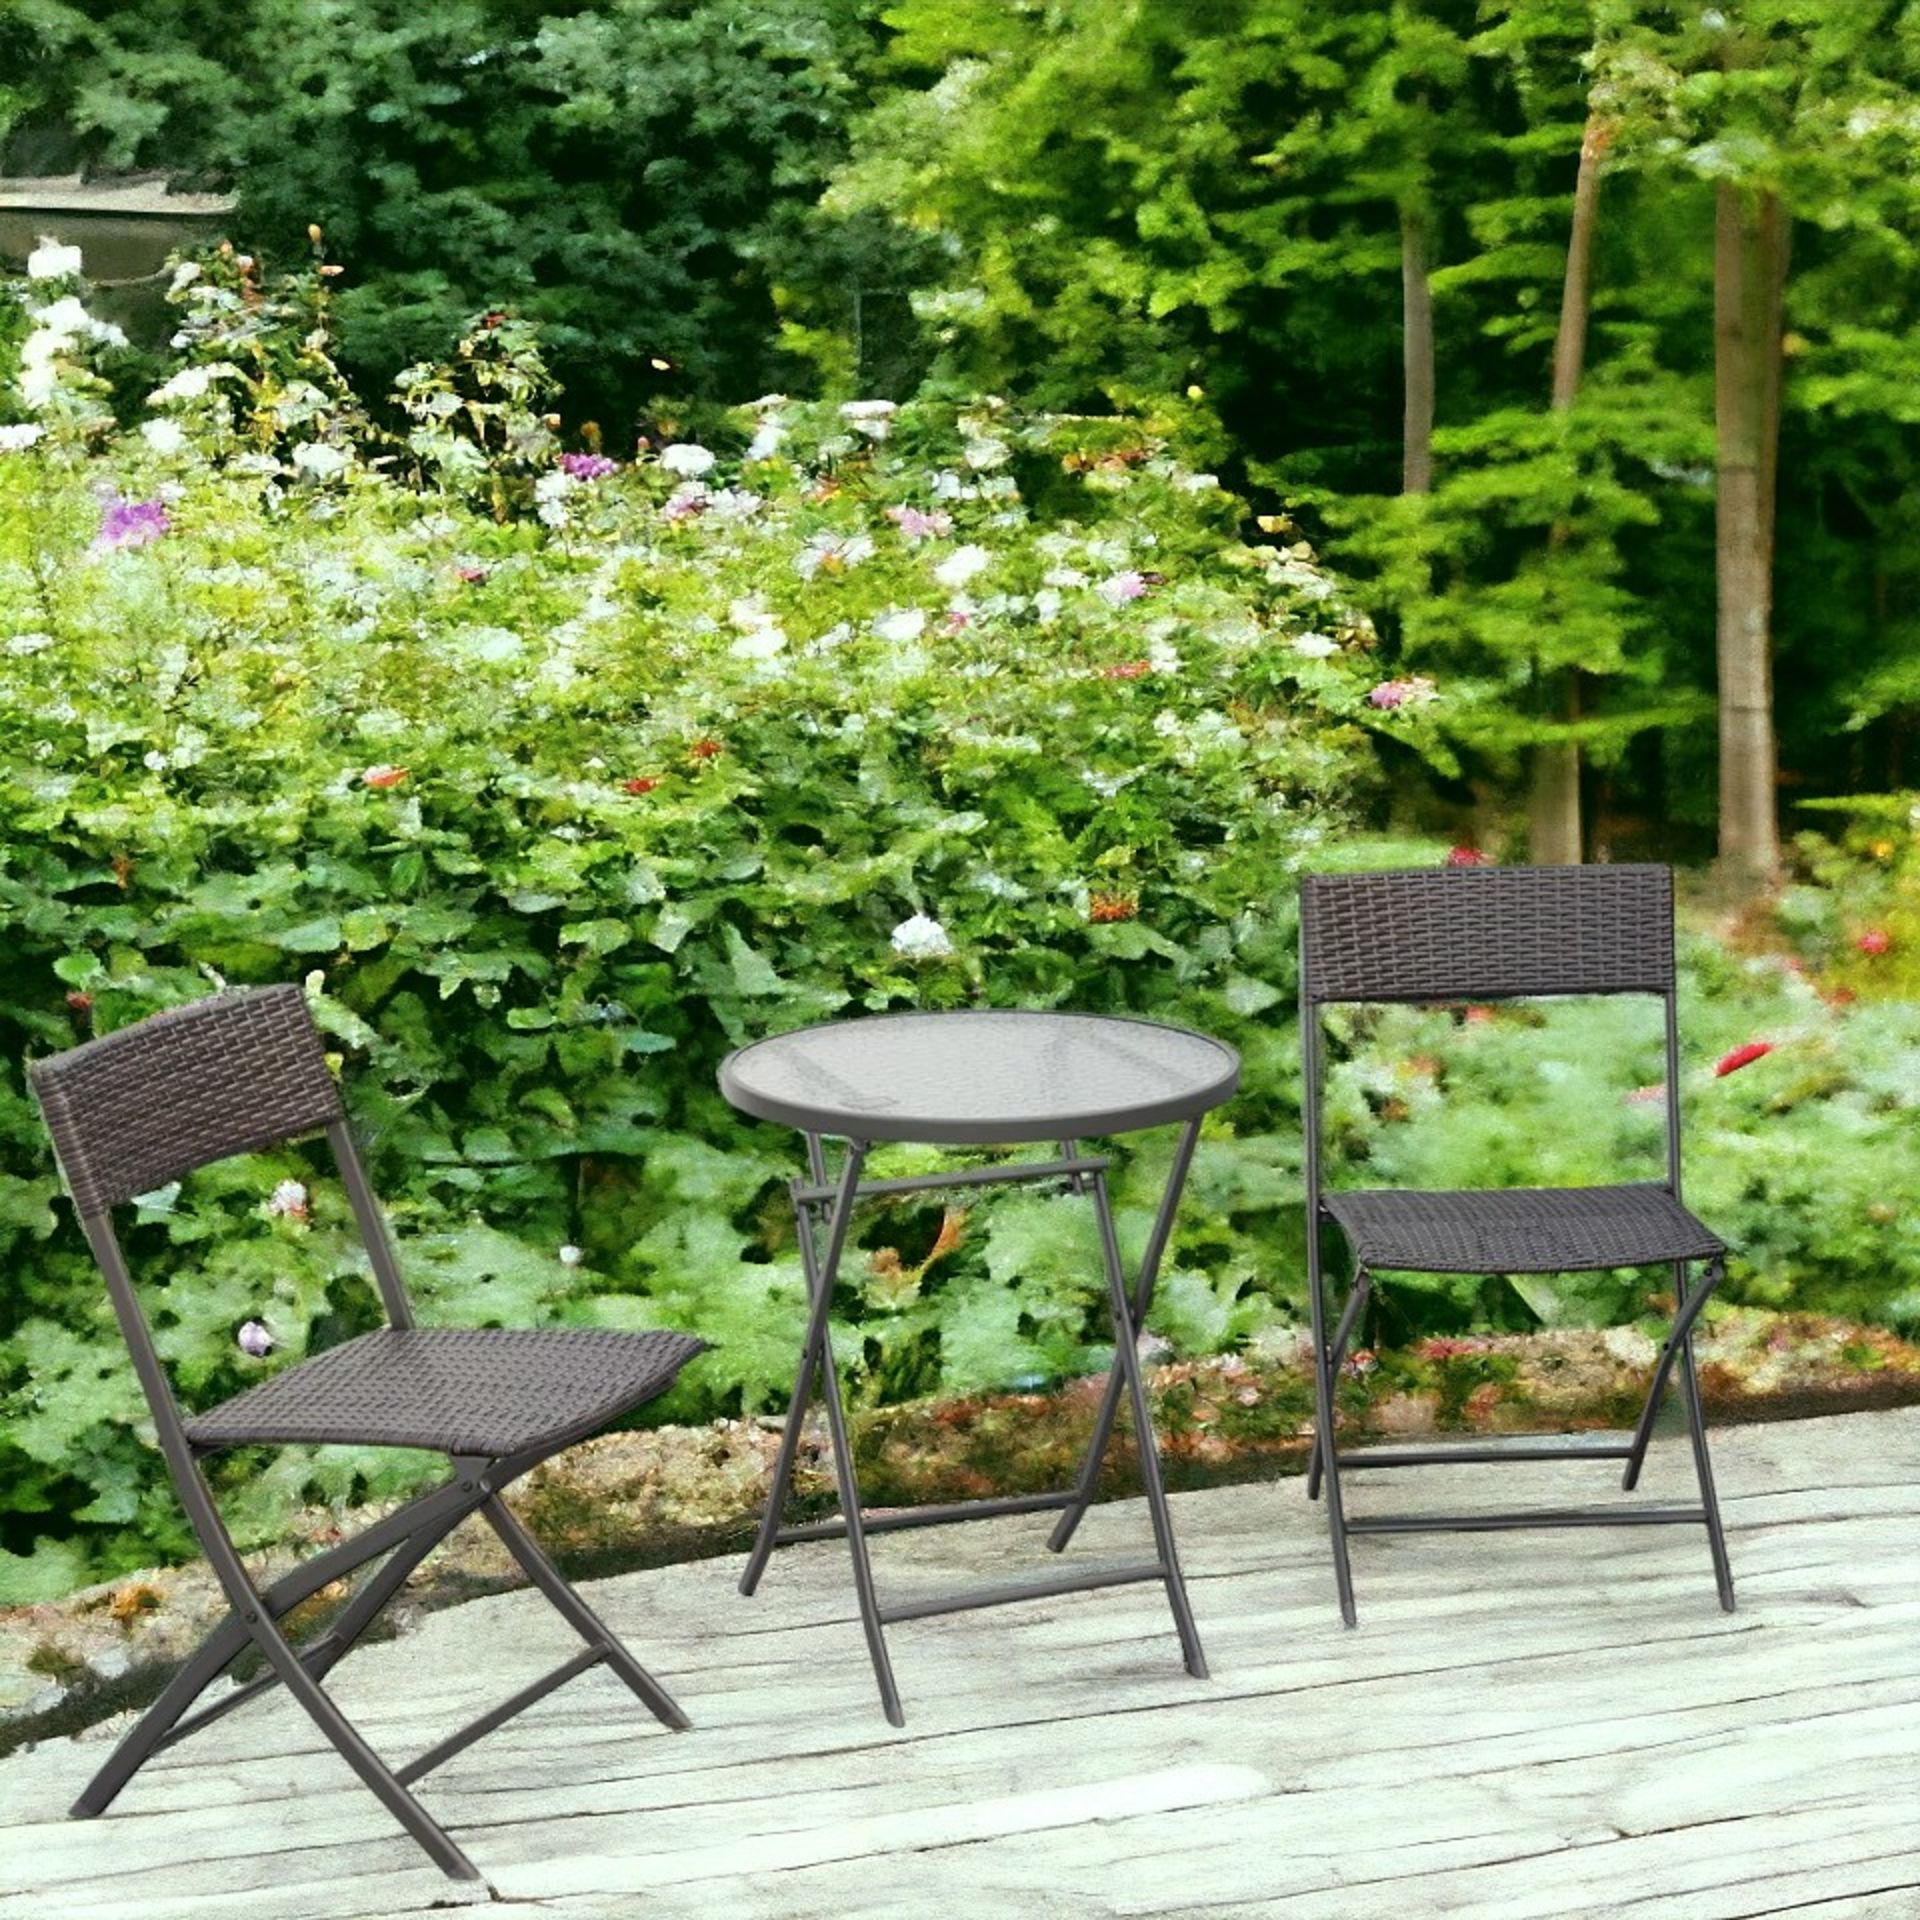 FREE DELIVERY- BRAND NEW 3PC RATTAN BISTRO SET FOLDING RATTAN CHAIR COFFEE TABLE GARDEN OUTDOOR